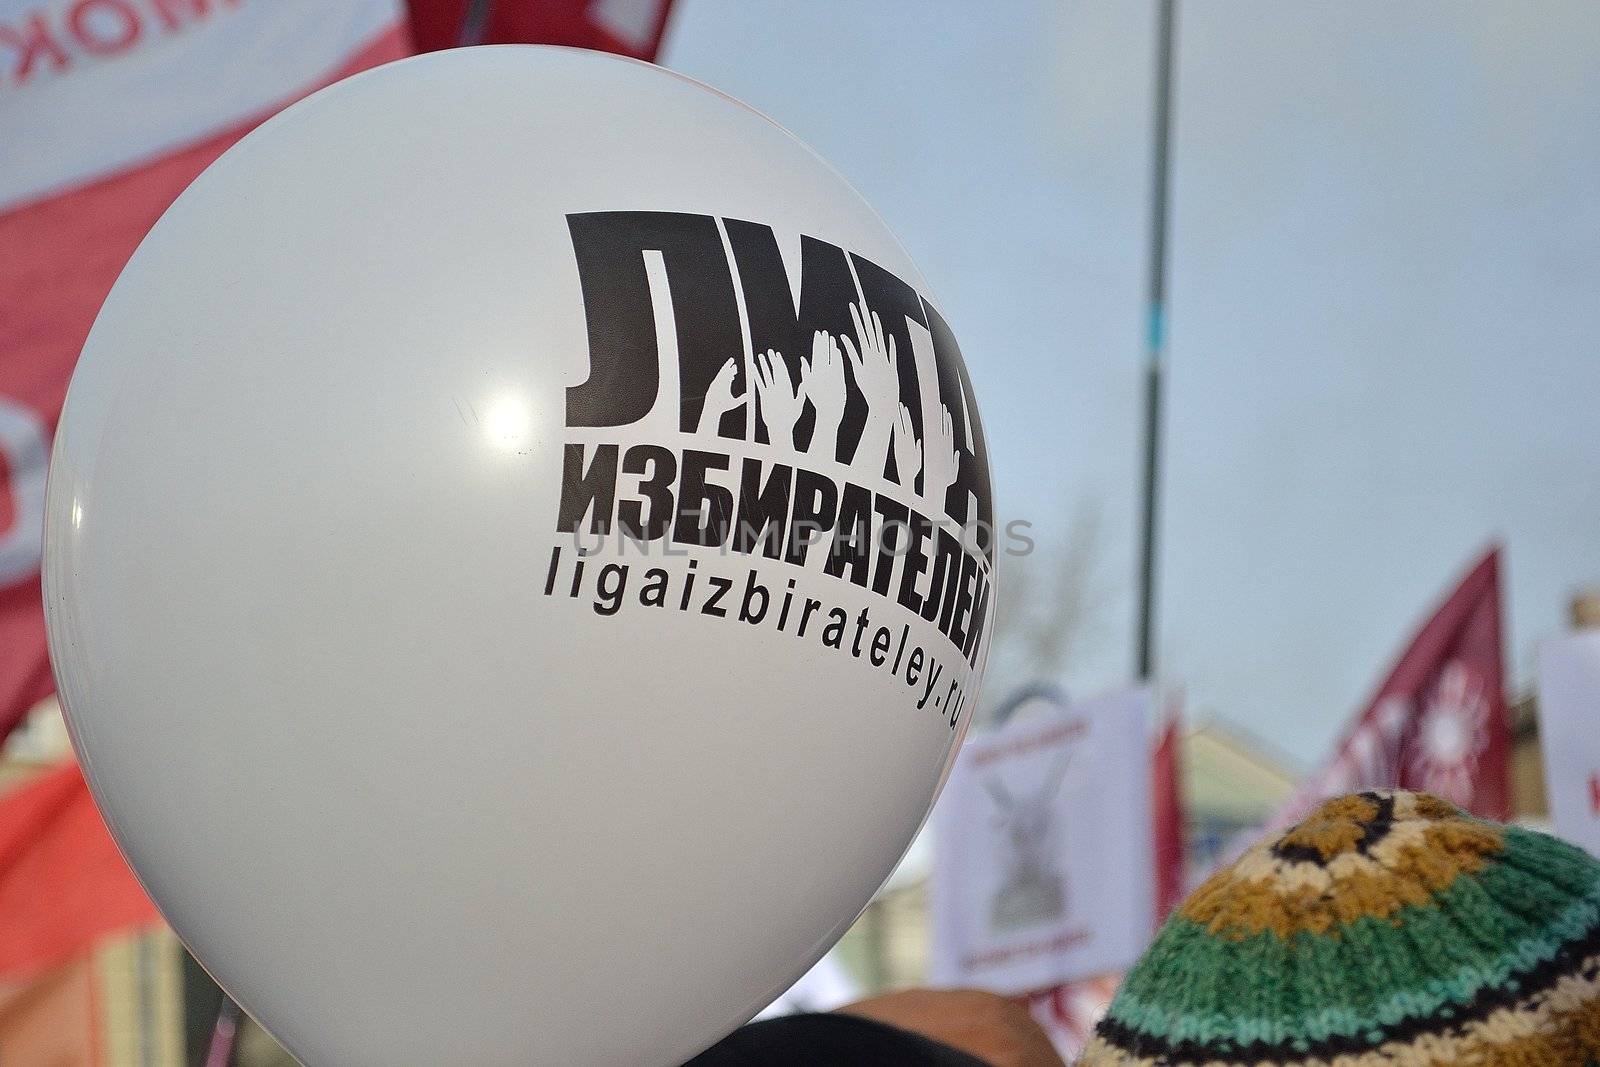 White balloon with the black logo of Russian Voter’s league